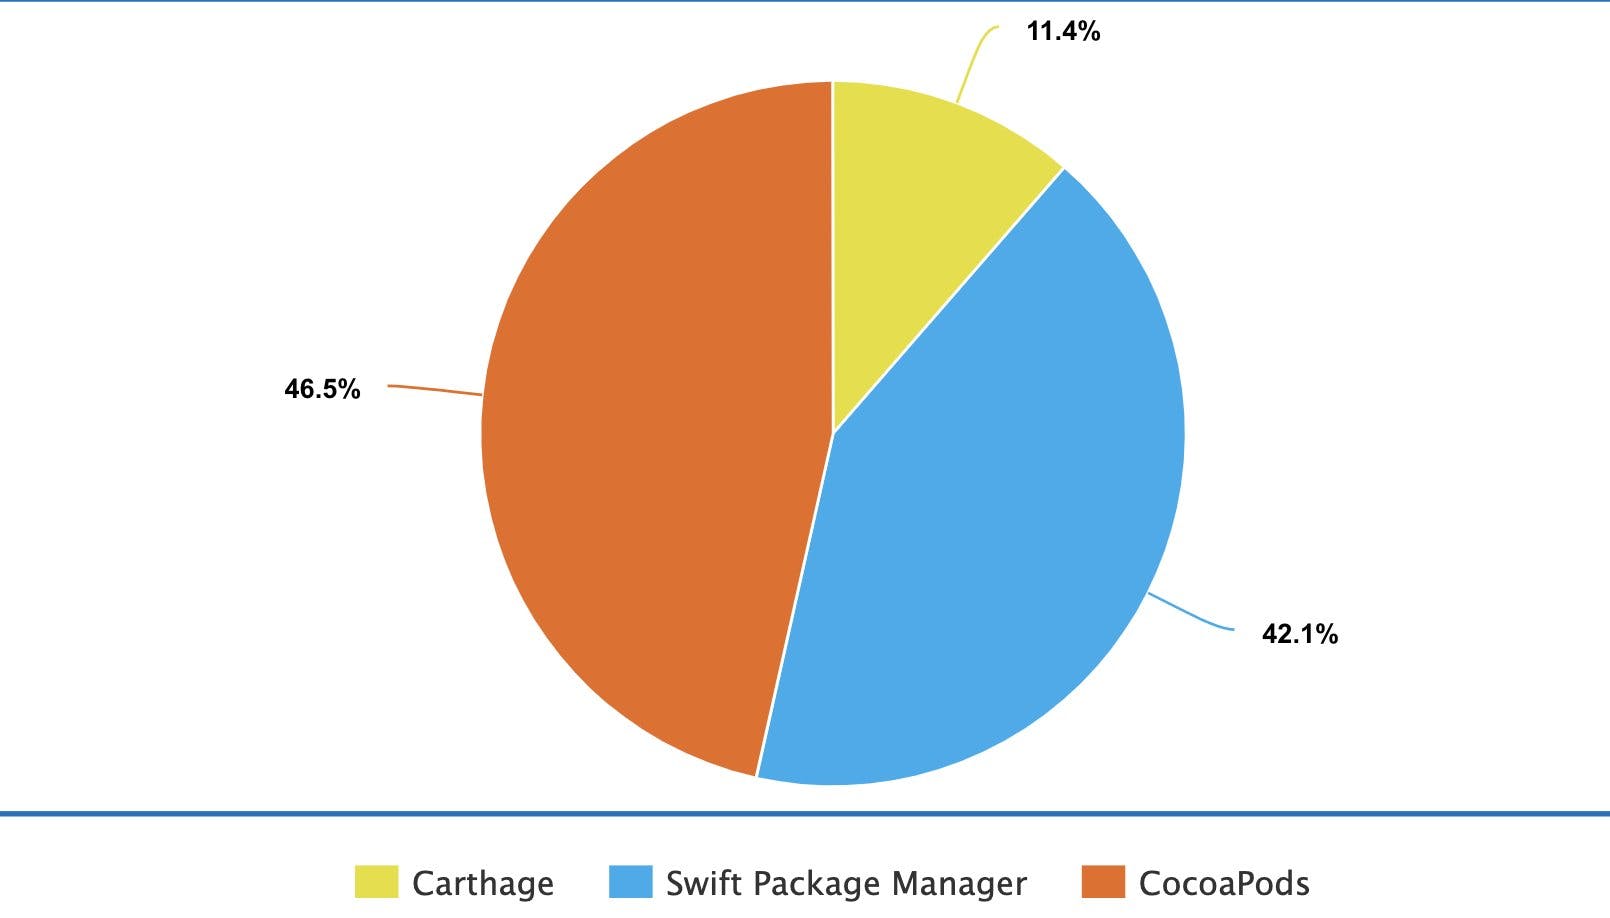 Twitter poll shows 11.4% of Carthage usage, 46.5% of CocoaPods, and 42.1% of Swift Package Manager